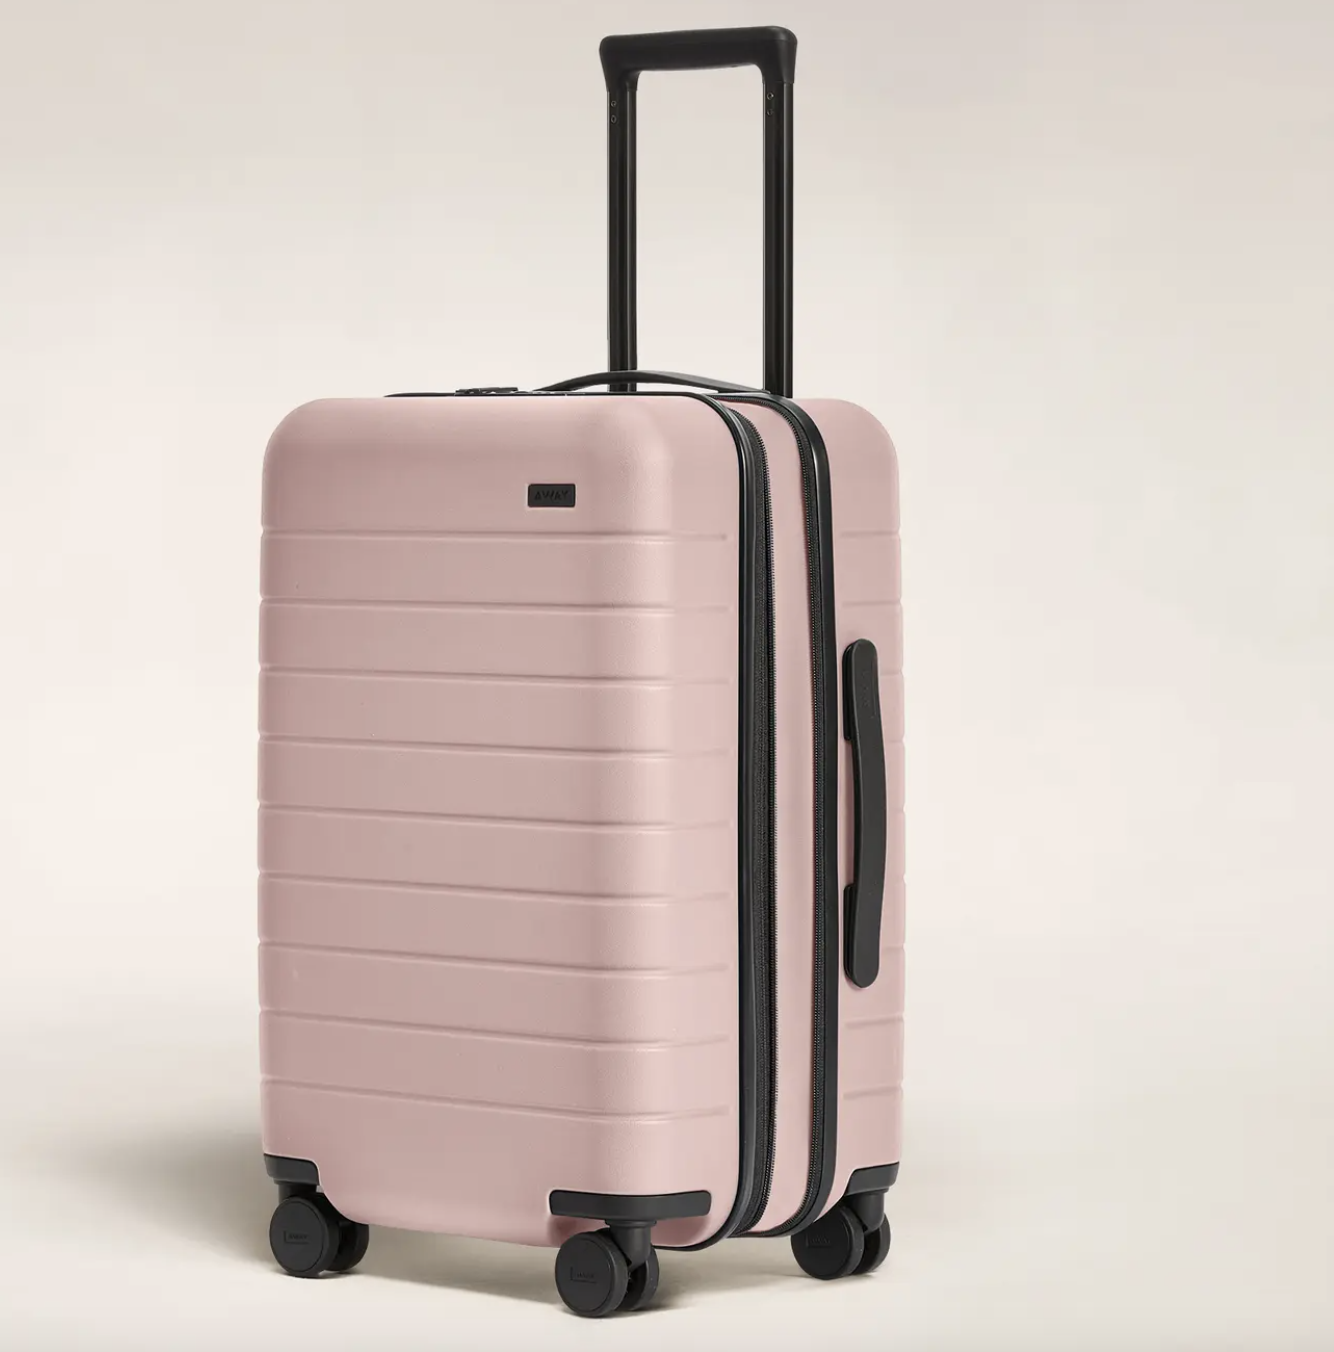 Tired of lugging around a clunky suitcase? Here are the best ...